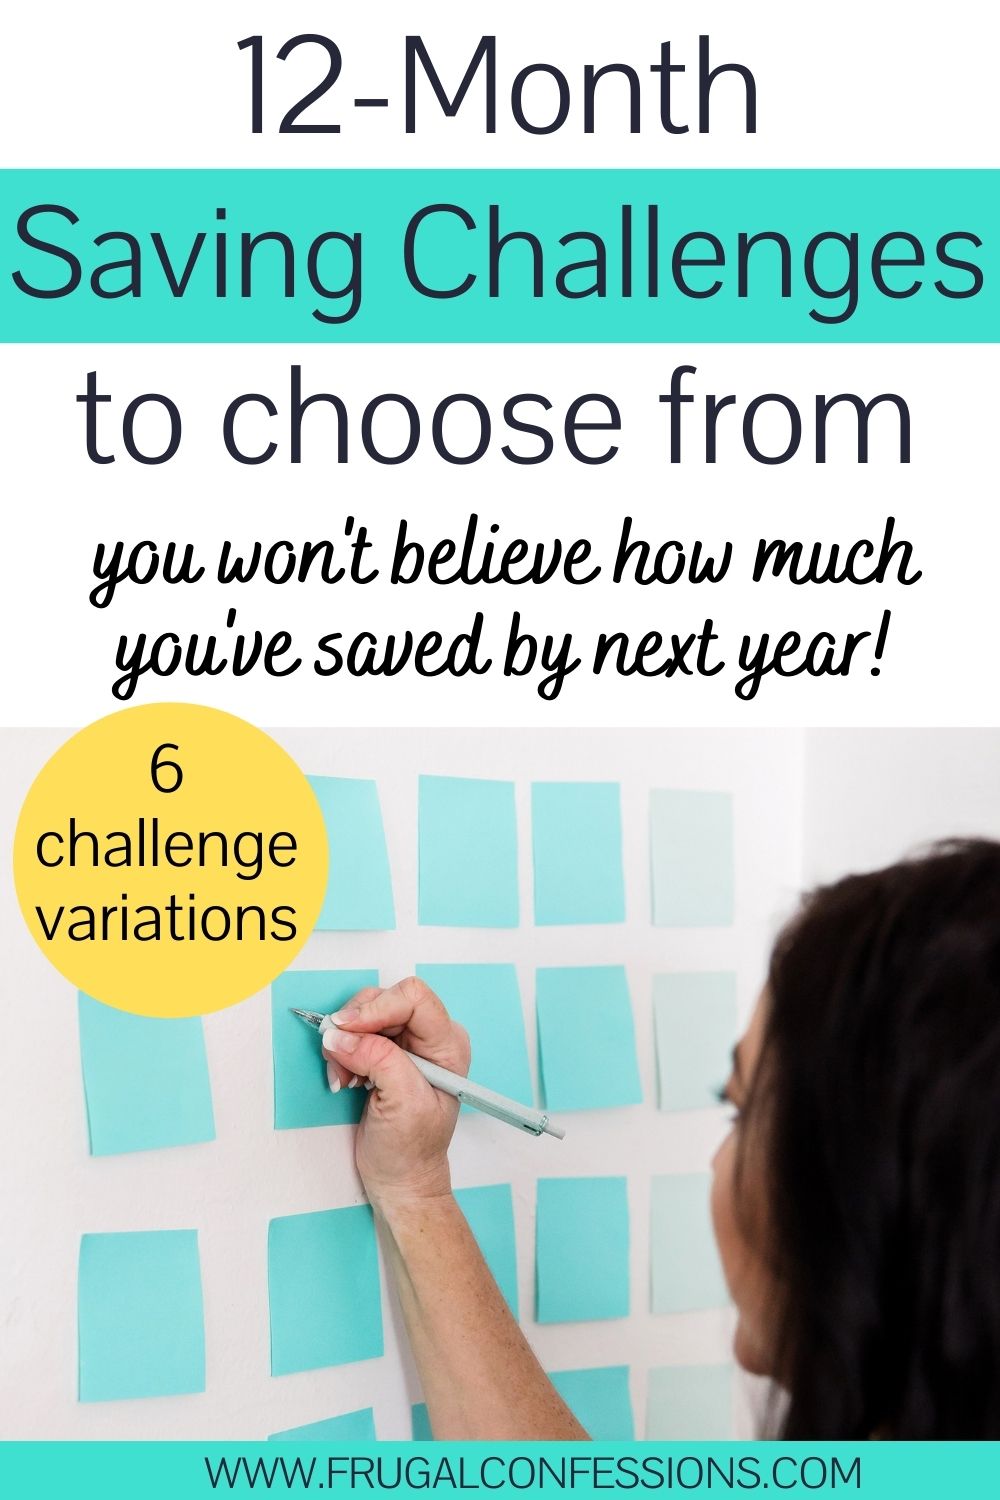 woman writing out notes on lots of blue post it notes on wall, text overlay "12 month savings challenges to choose from"